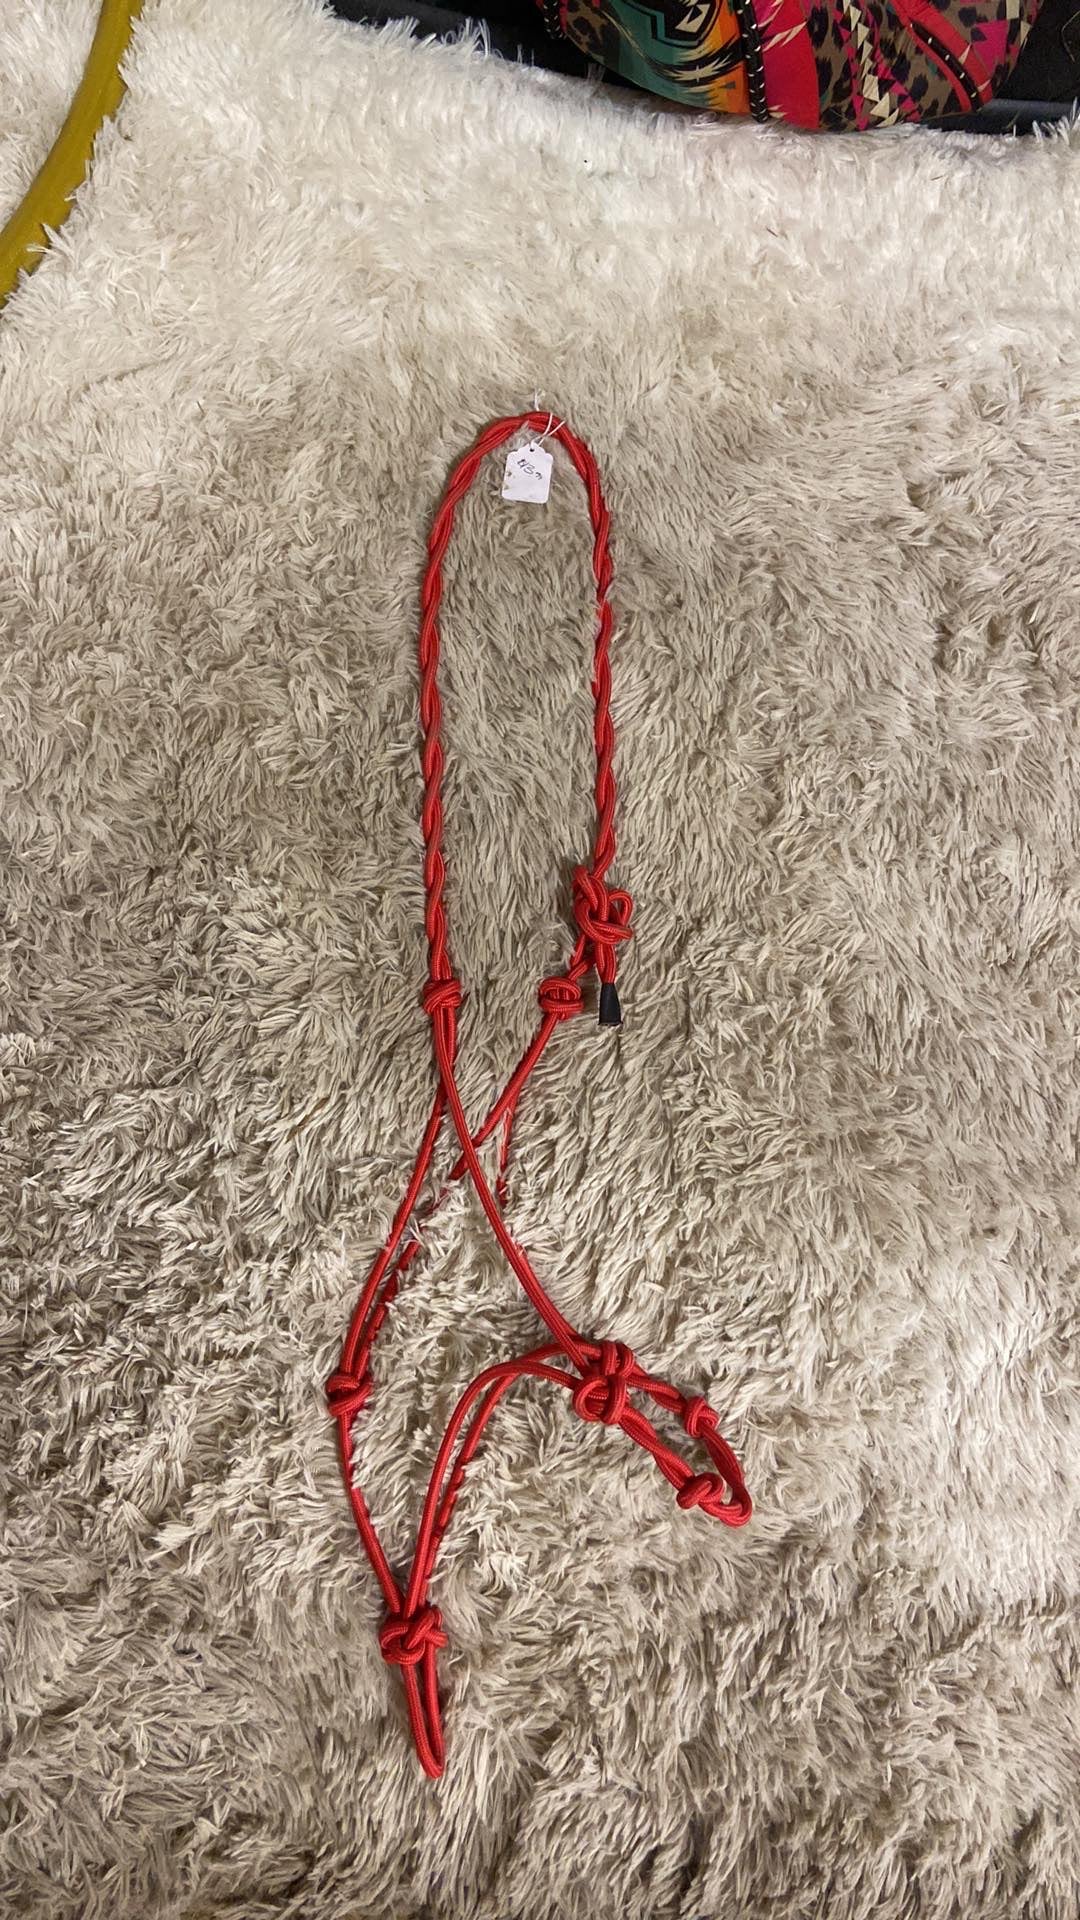 Full size red rope halter with knots new